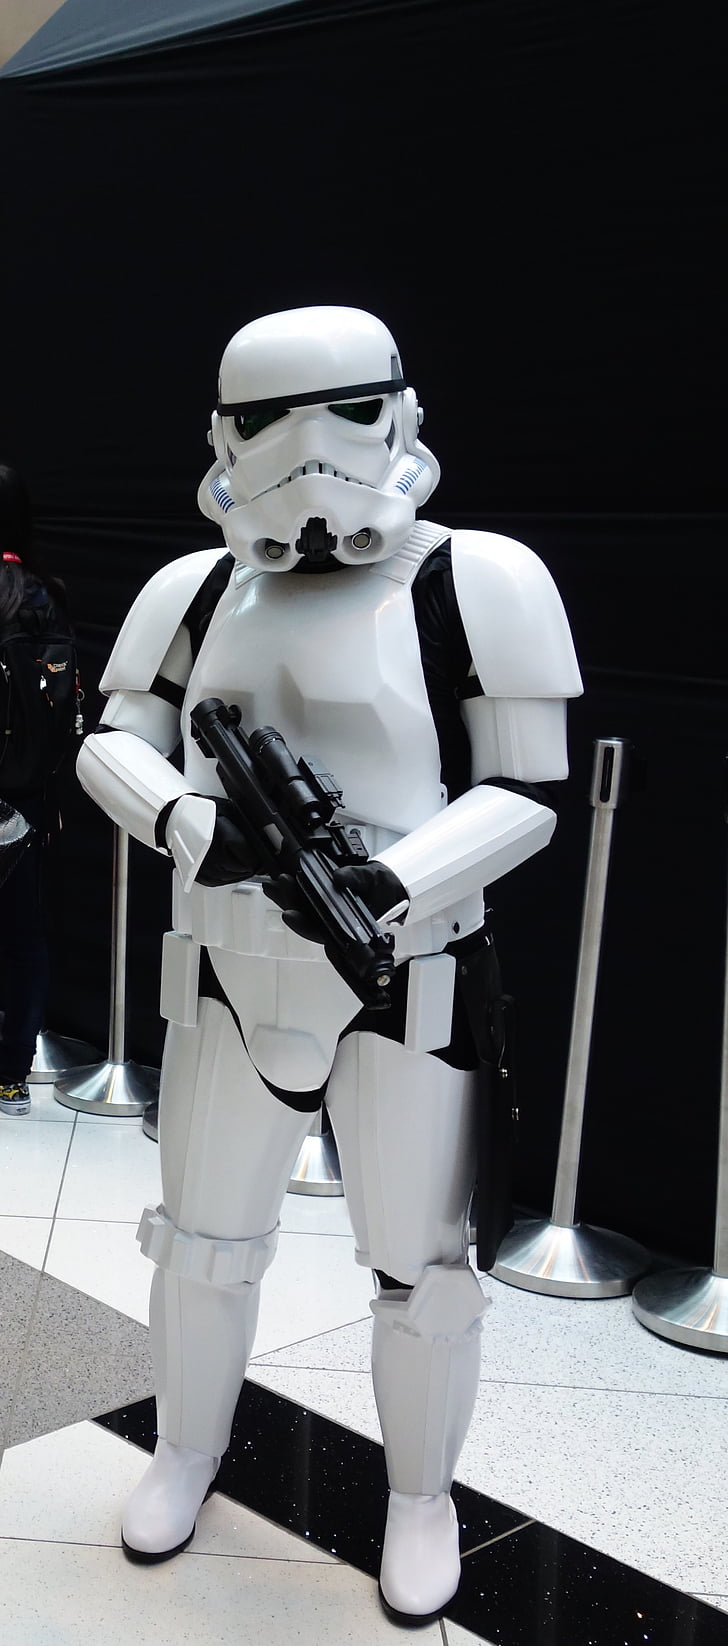 storm trooper, star wars, sci fi, statue, costume, character, armed Forces